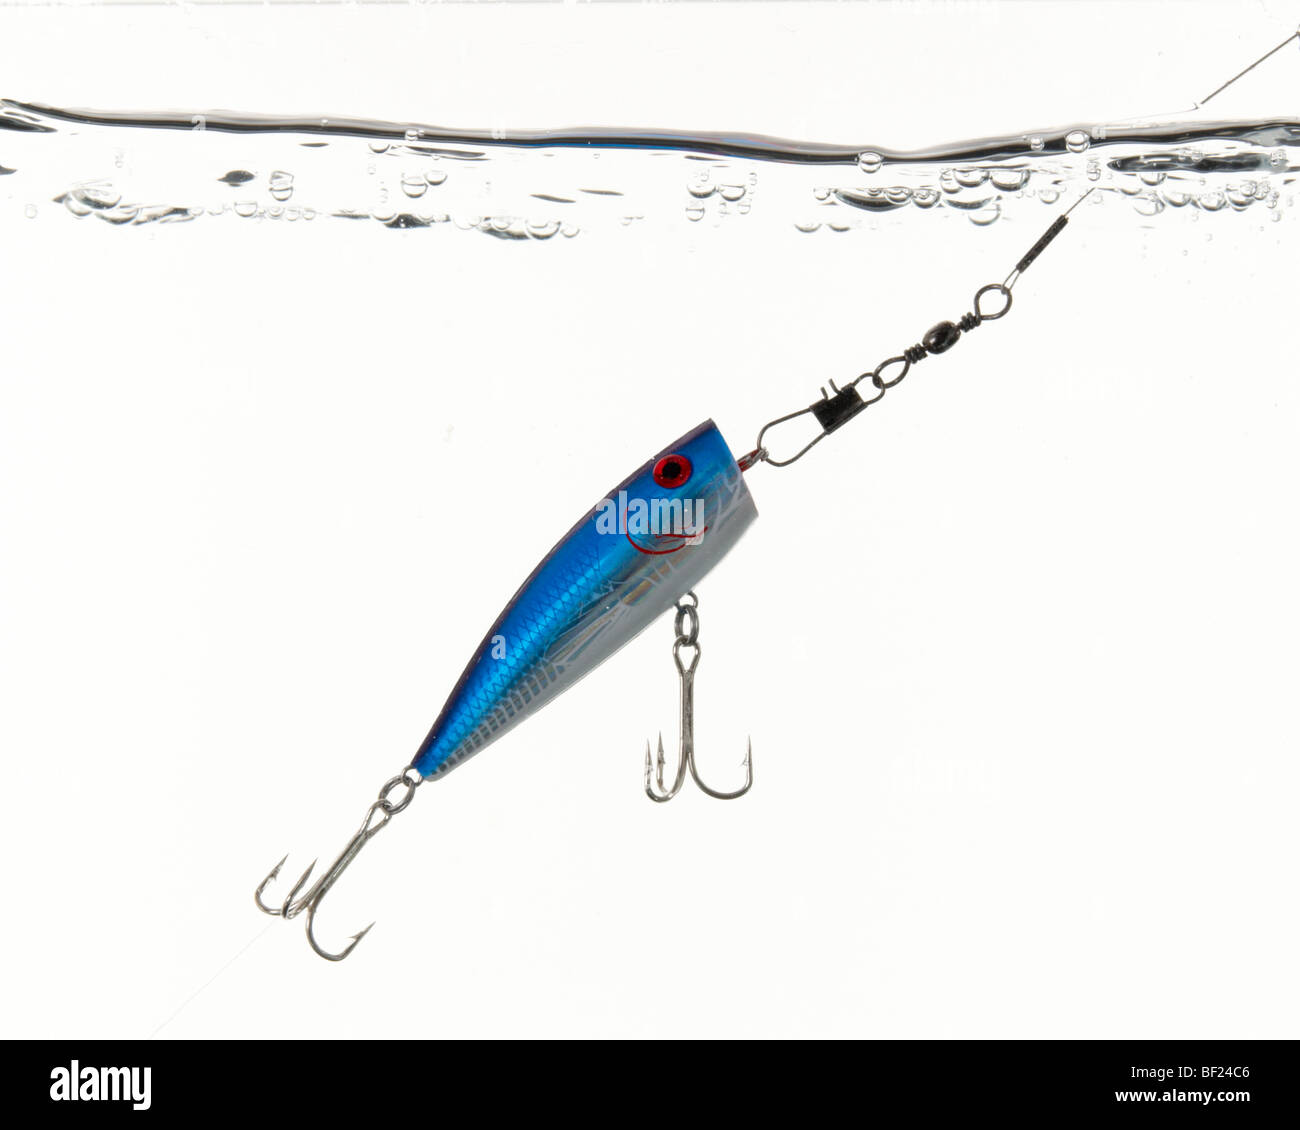 https://c8.alamy.com/comp/BF24C6/blue-surface-popper-fishing-pike-lure-underwater-shot-with-surface-BF24C6.jpg